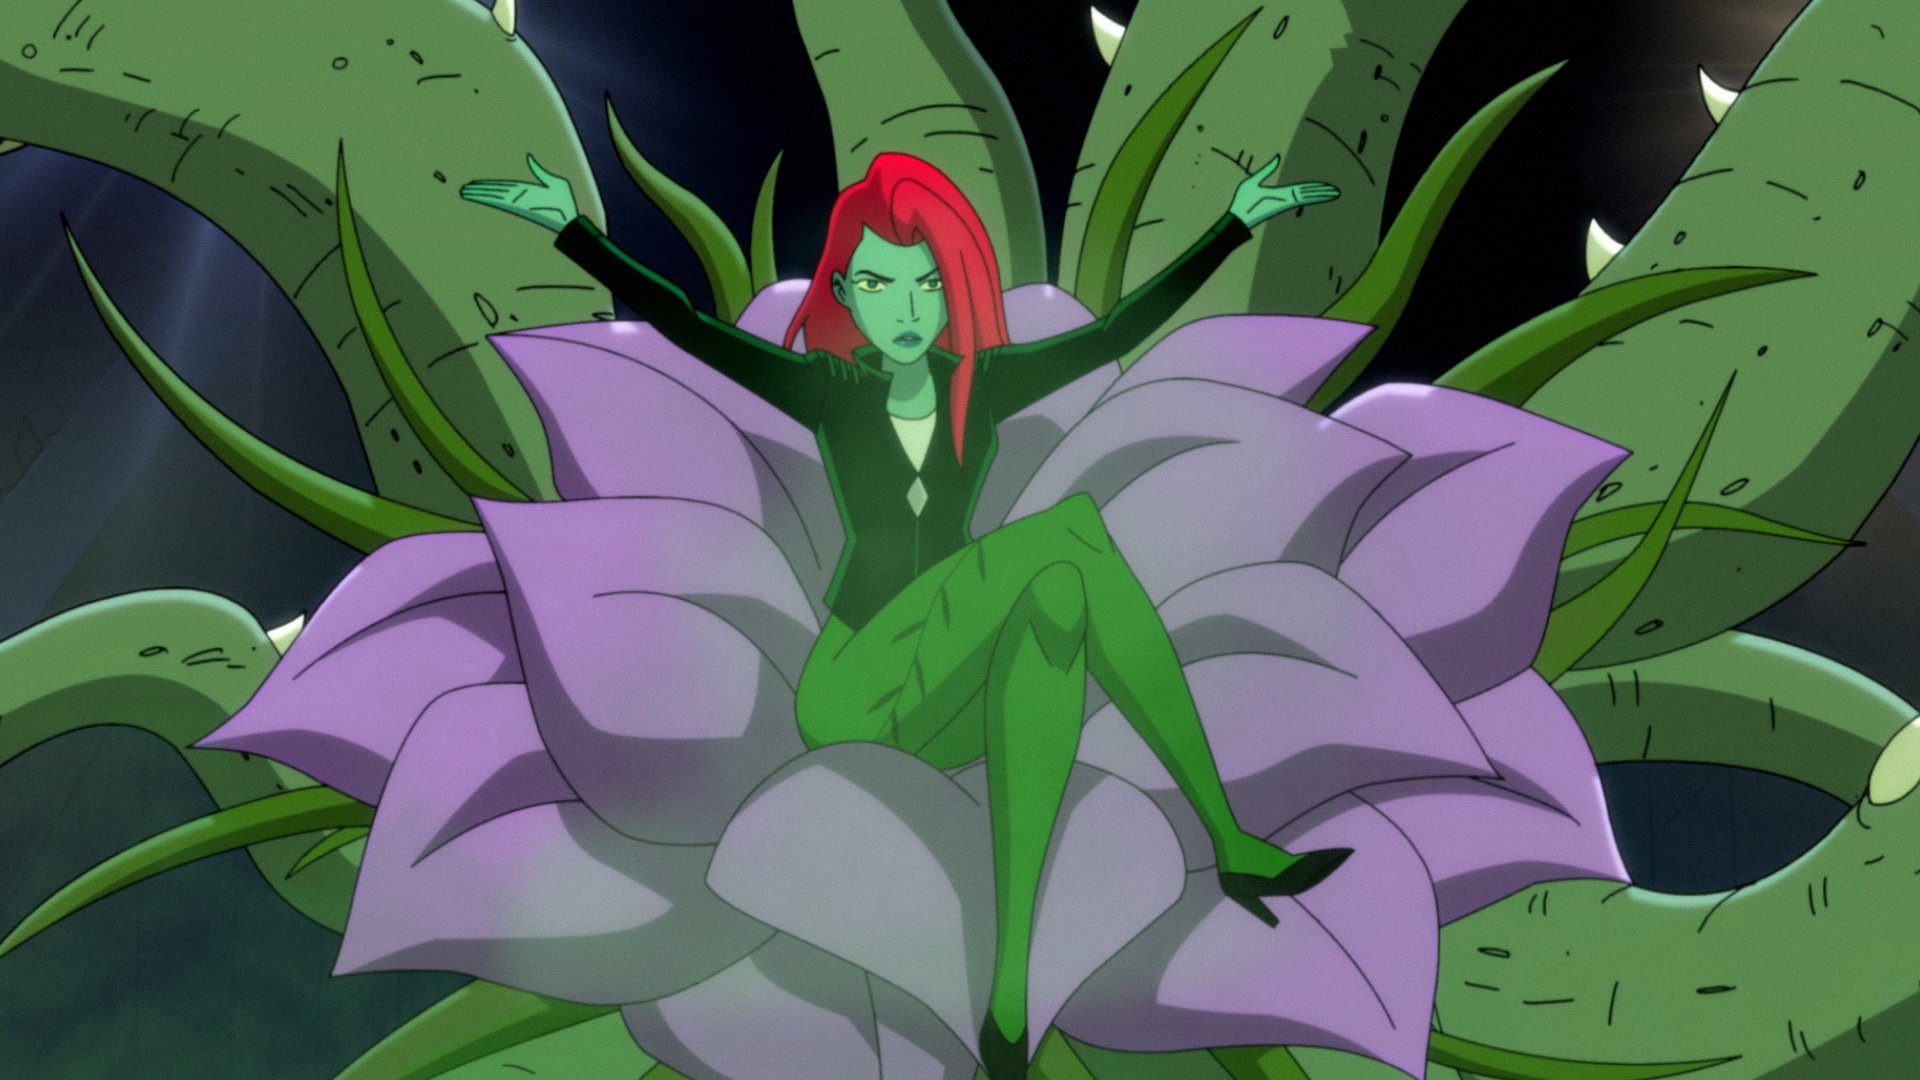 Poison Ivy in a flower, Season 1 of 'Harley Quinn'